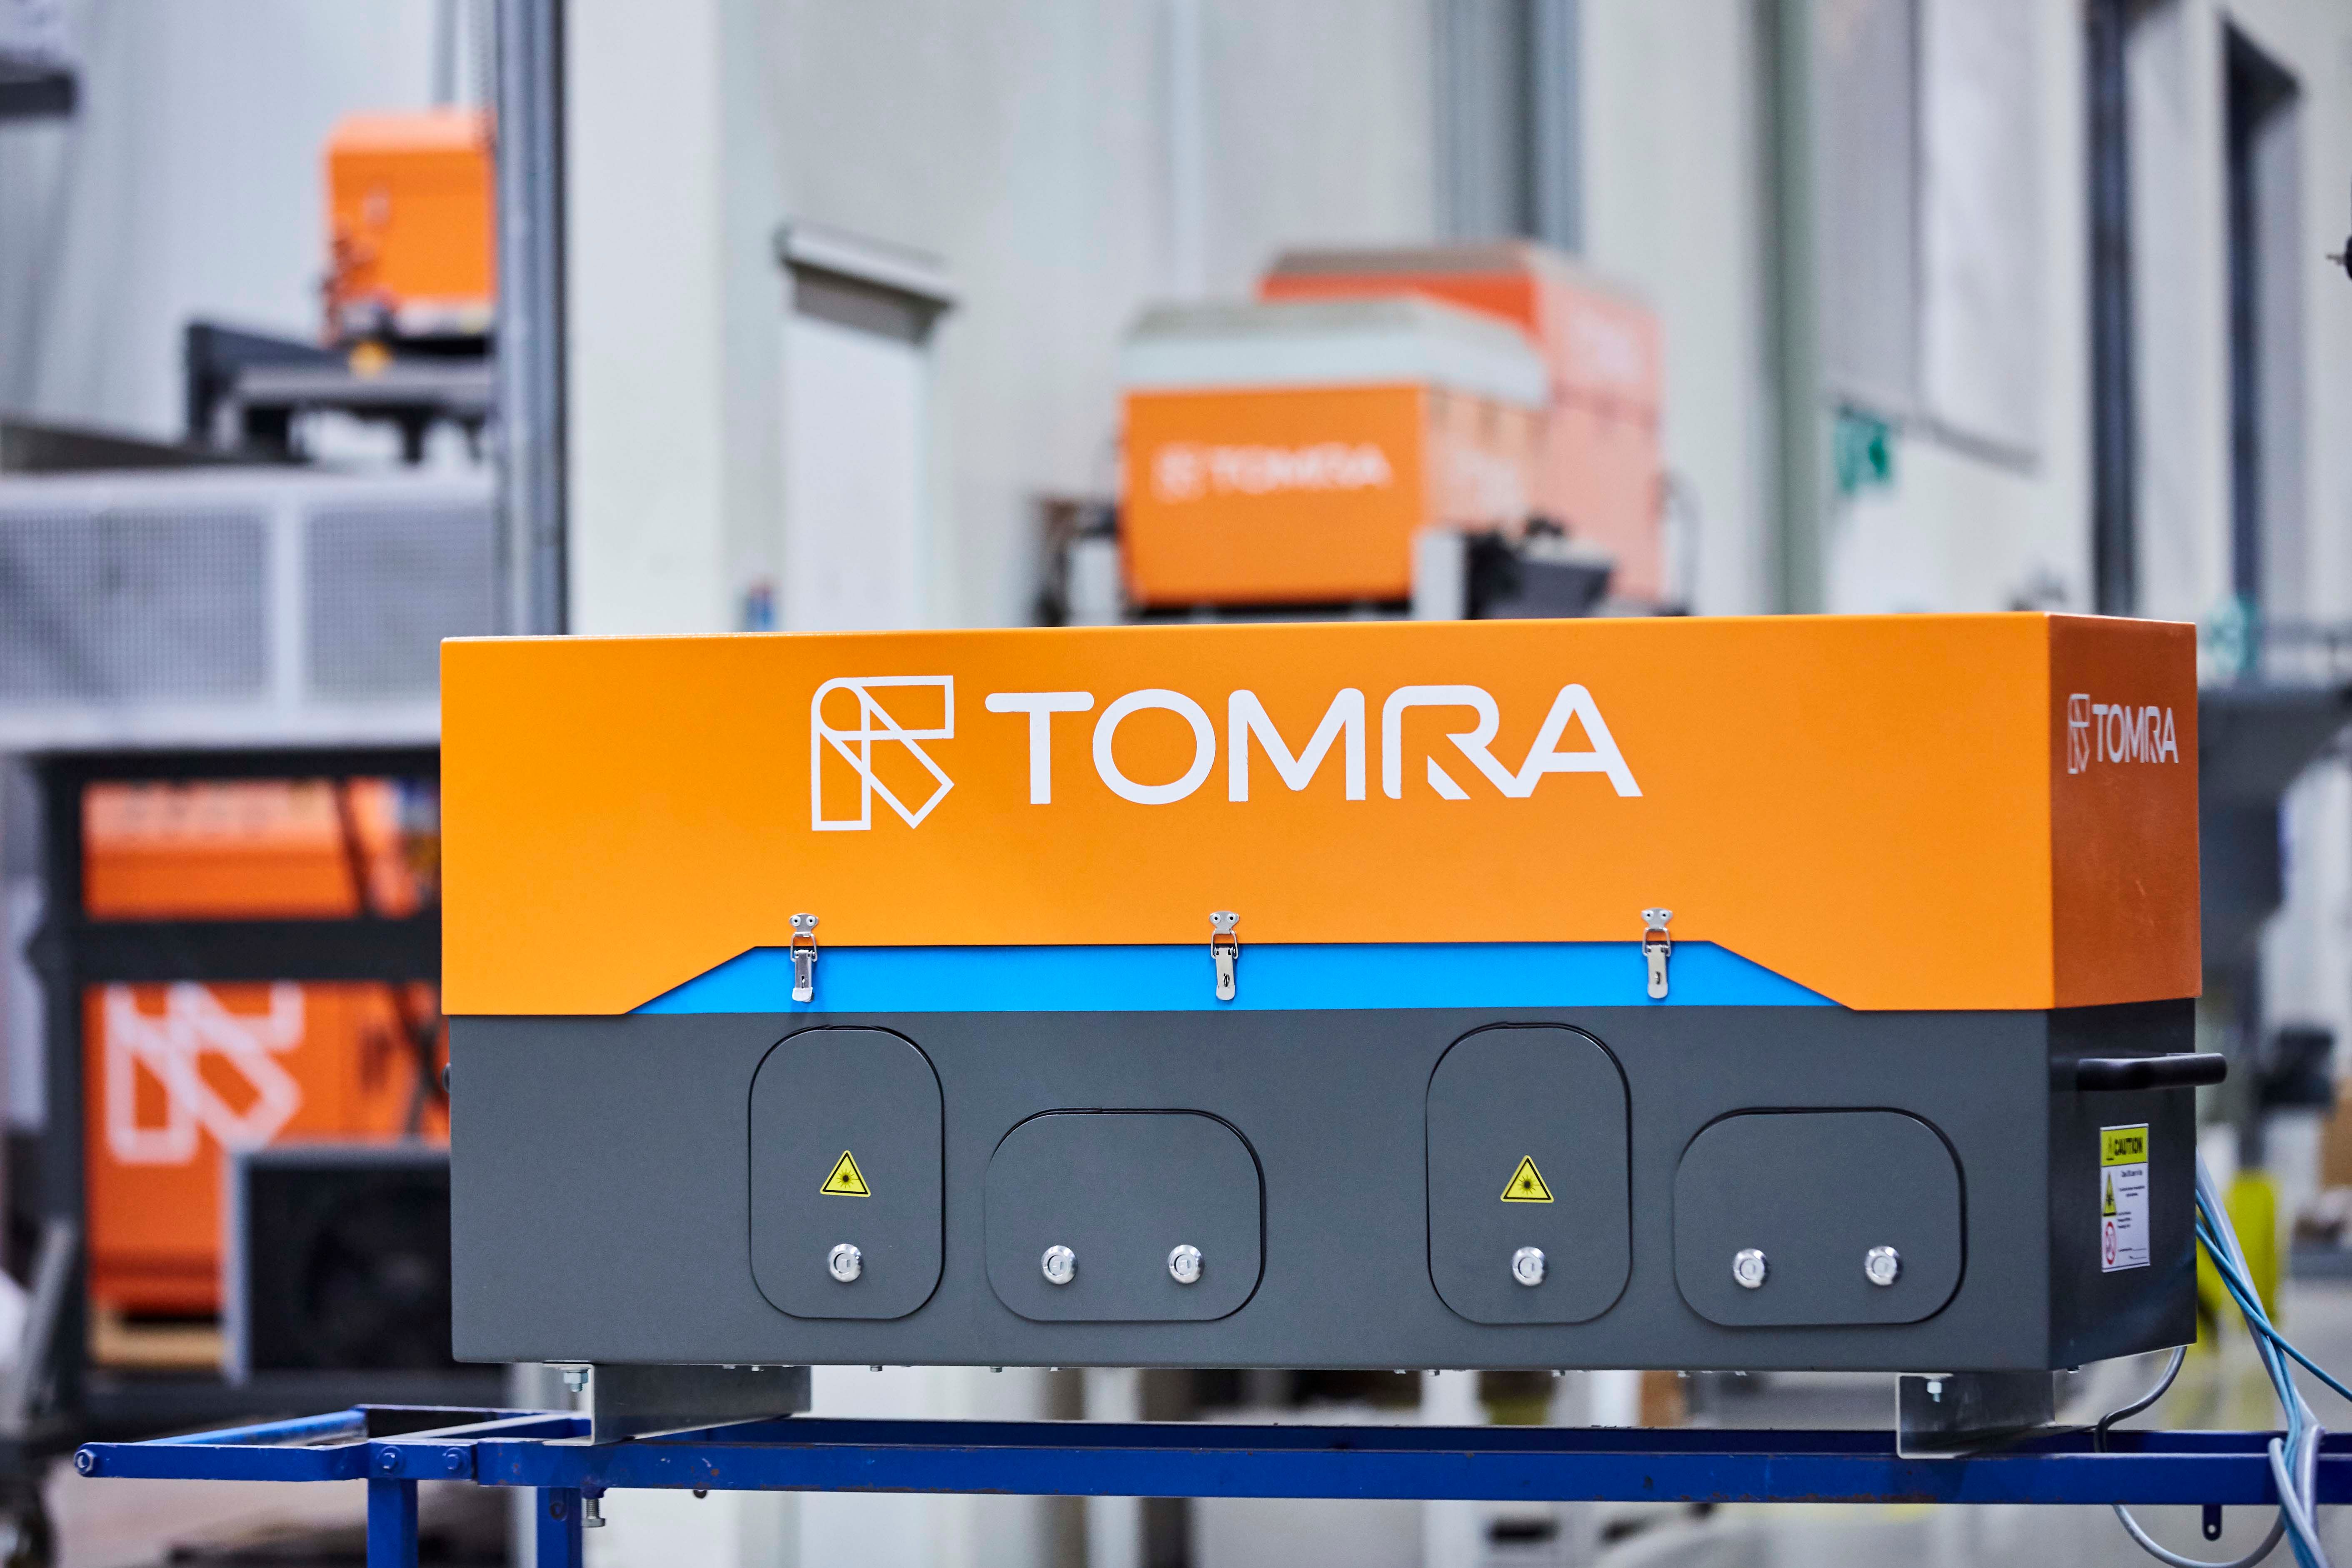 TOMRA to sponsor the Circular Economy Theatre at RWM 2021 and highlight the role of its technology in the transition towards a more circular economy